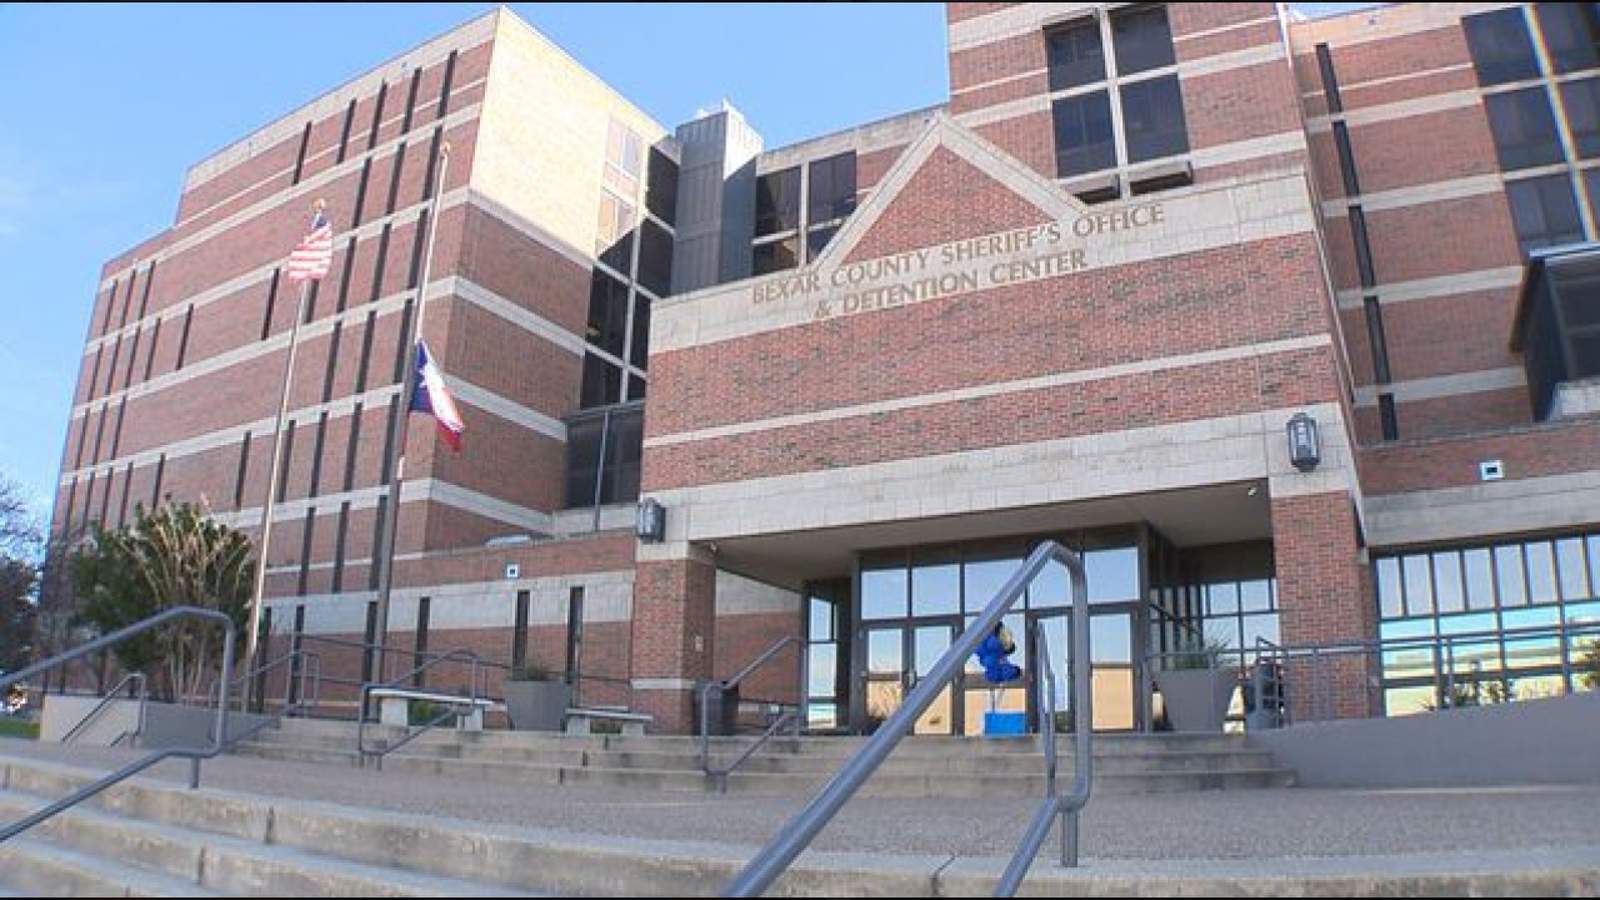 Bexar County jailer who tested positive for COVID-19 worked 1 day after feeling sick